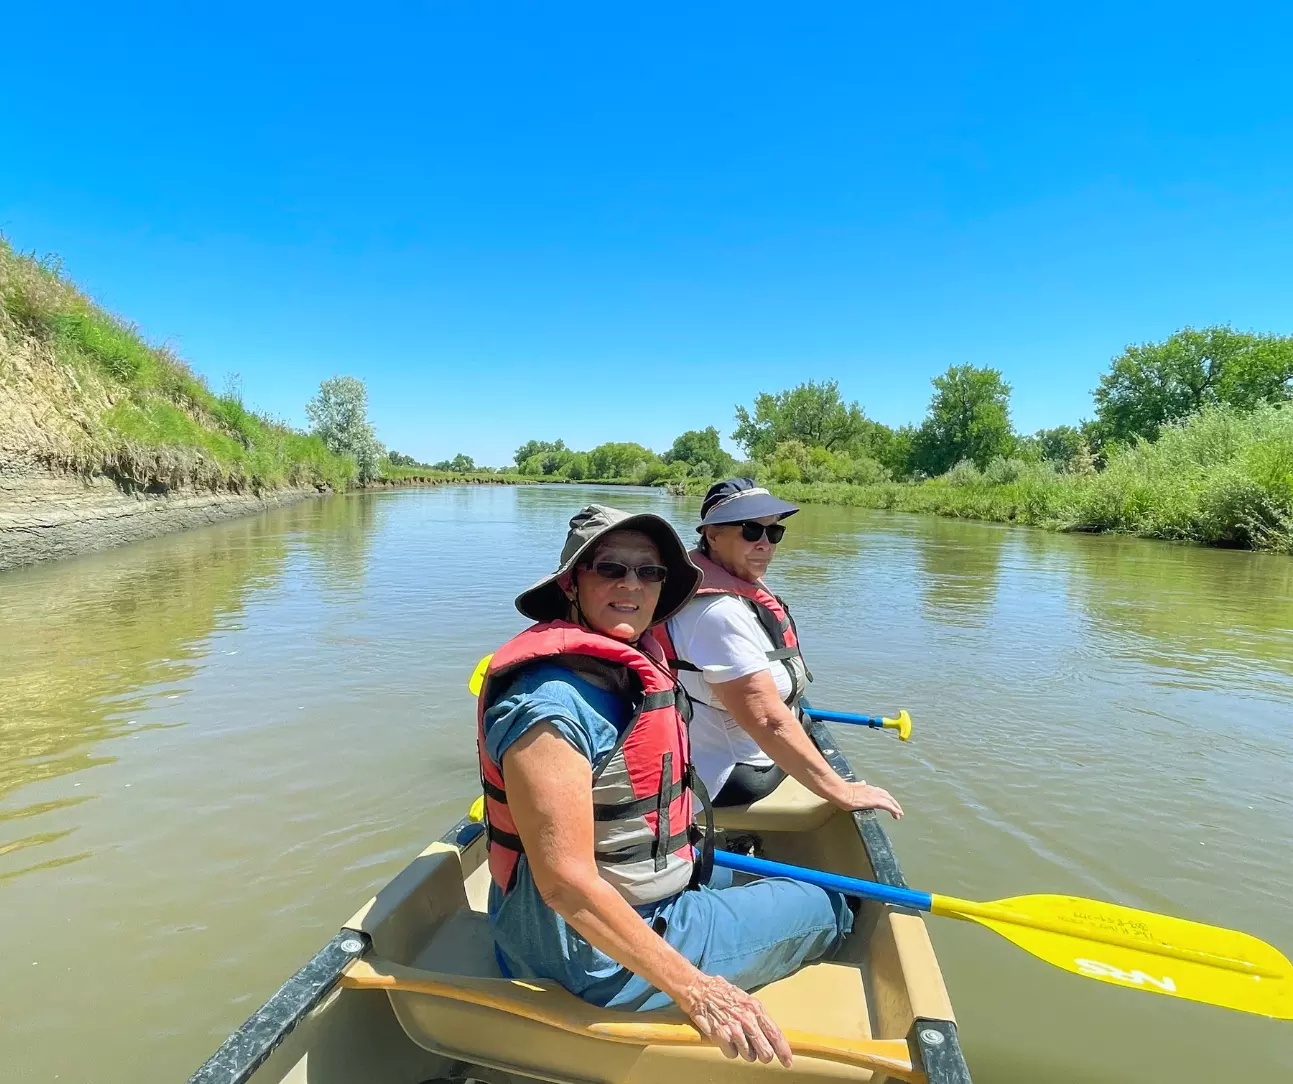 How to Join Our St. Vrain River Canoe Day Trip